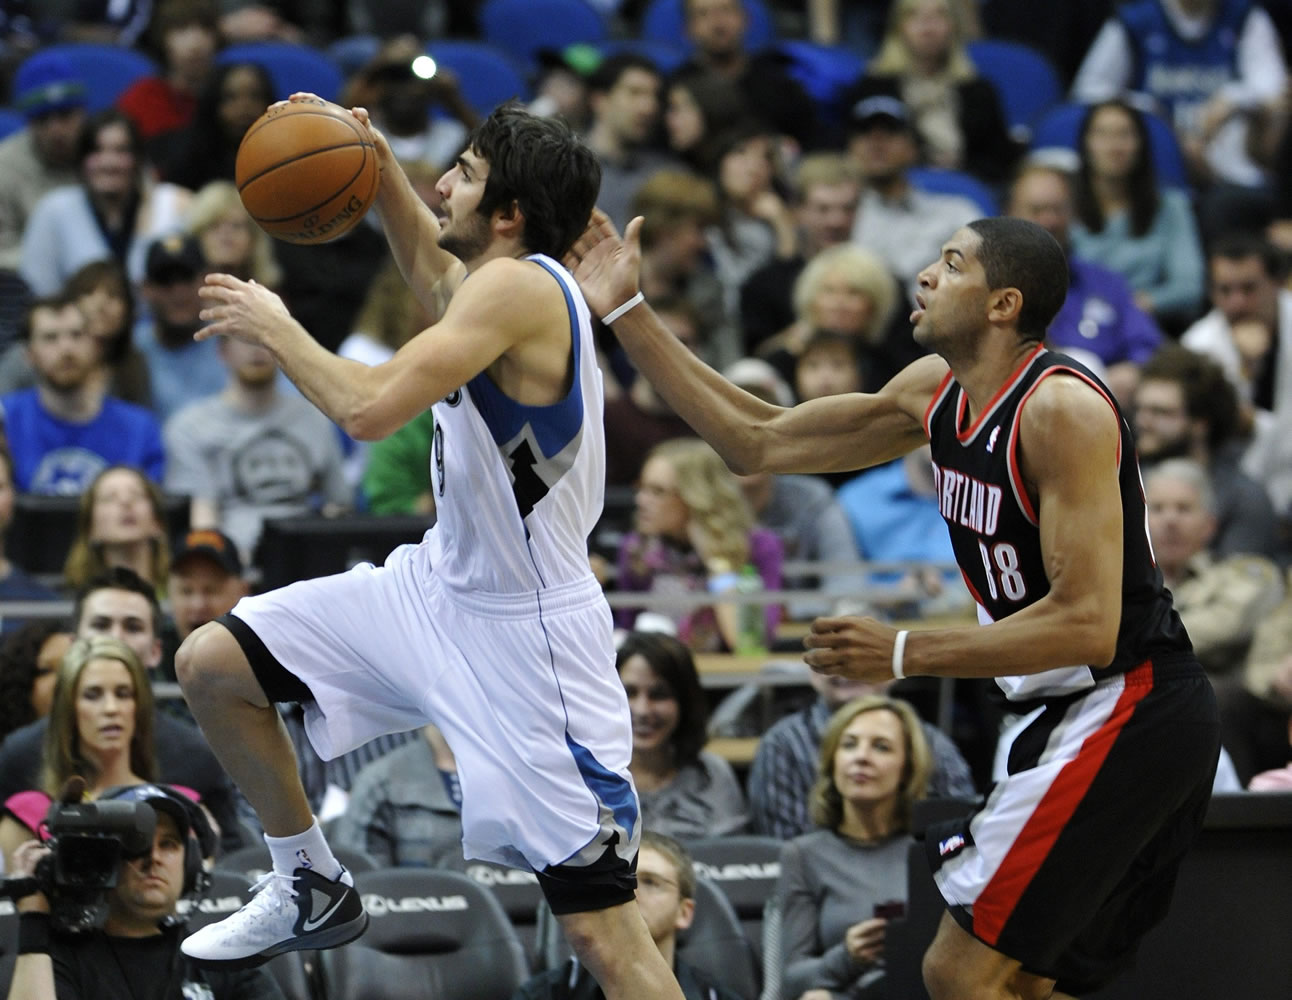 Minnesota Timberwolves' Ricky Rubio, left, of Spain, lays up ahead of Portland Trail Blazers' Nicolas Batum, of France, during the second half of an NBA basketball game Wednesday, March 7, 2012 in Minneapolis. The Timberwolves won 106-94.